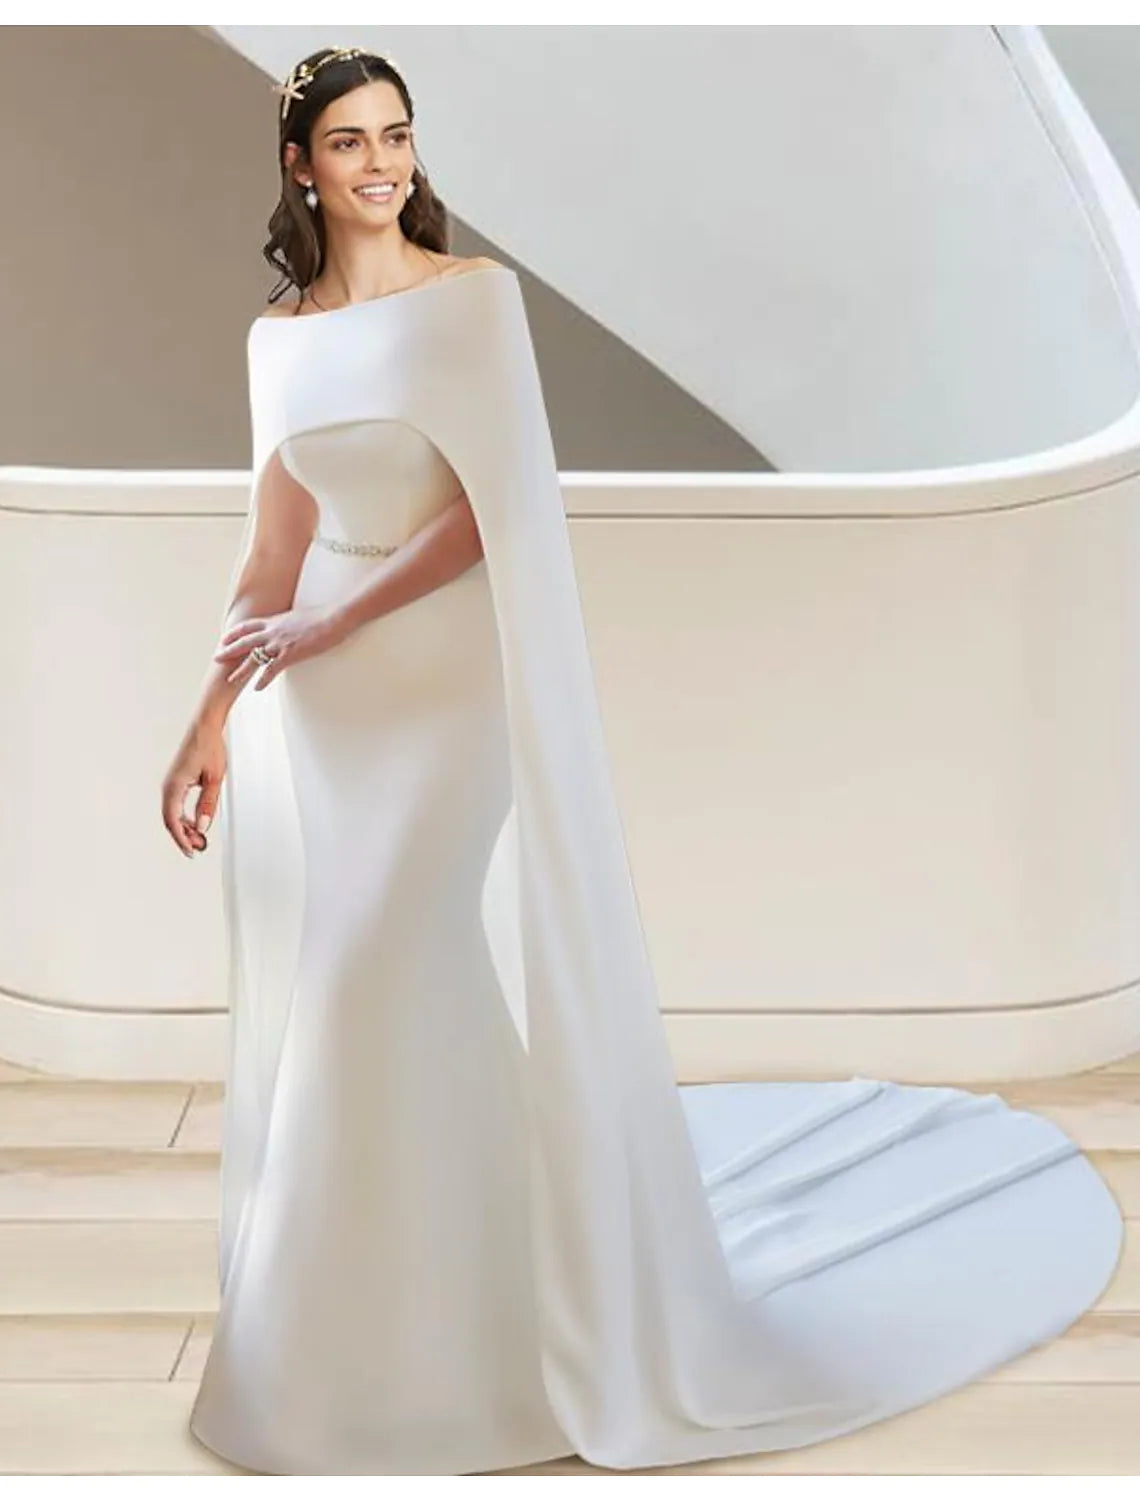 Formal Wedding Dresses Two Piece Sleeveless Strapless Stretch Fabric Sashes Ribbons